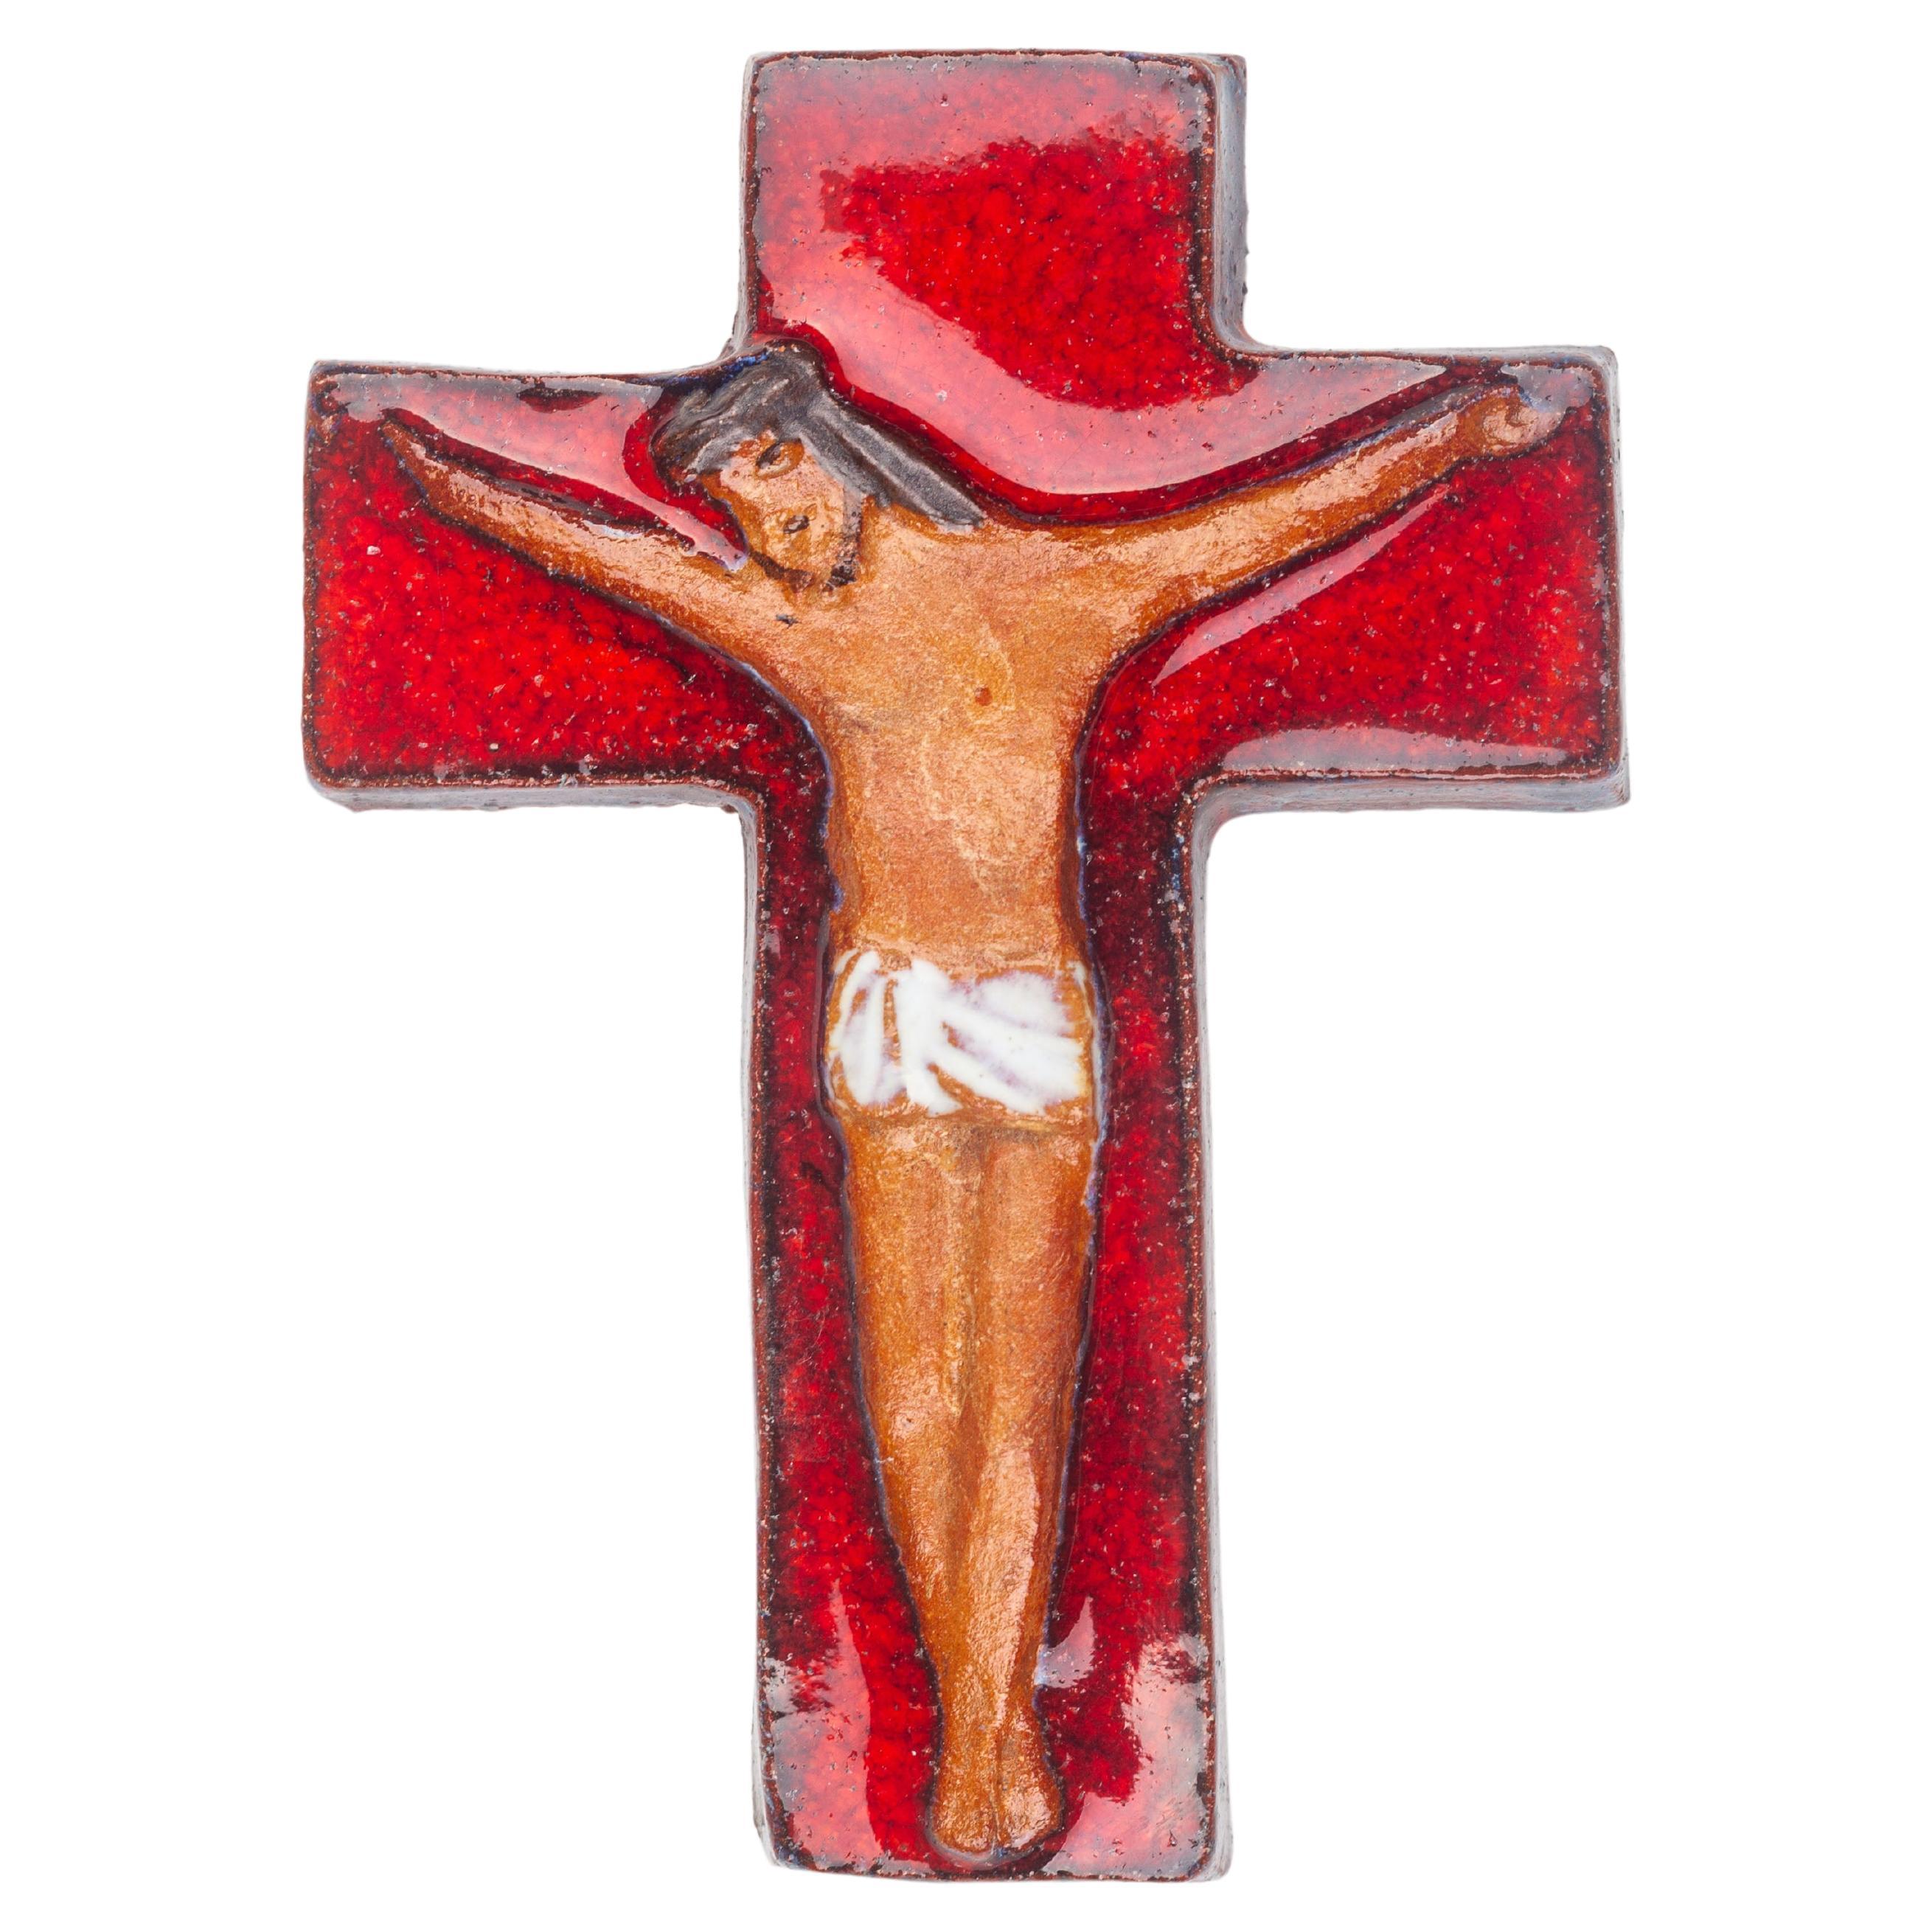 Glossy Red Ceramic Cross with Abstract Matte Christ Figure in Earth Tones For Sale